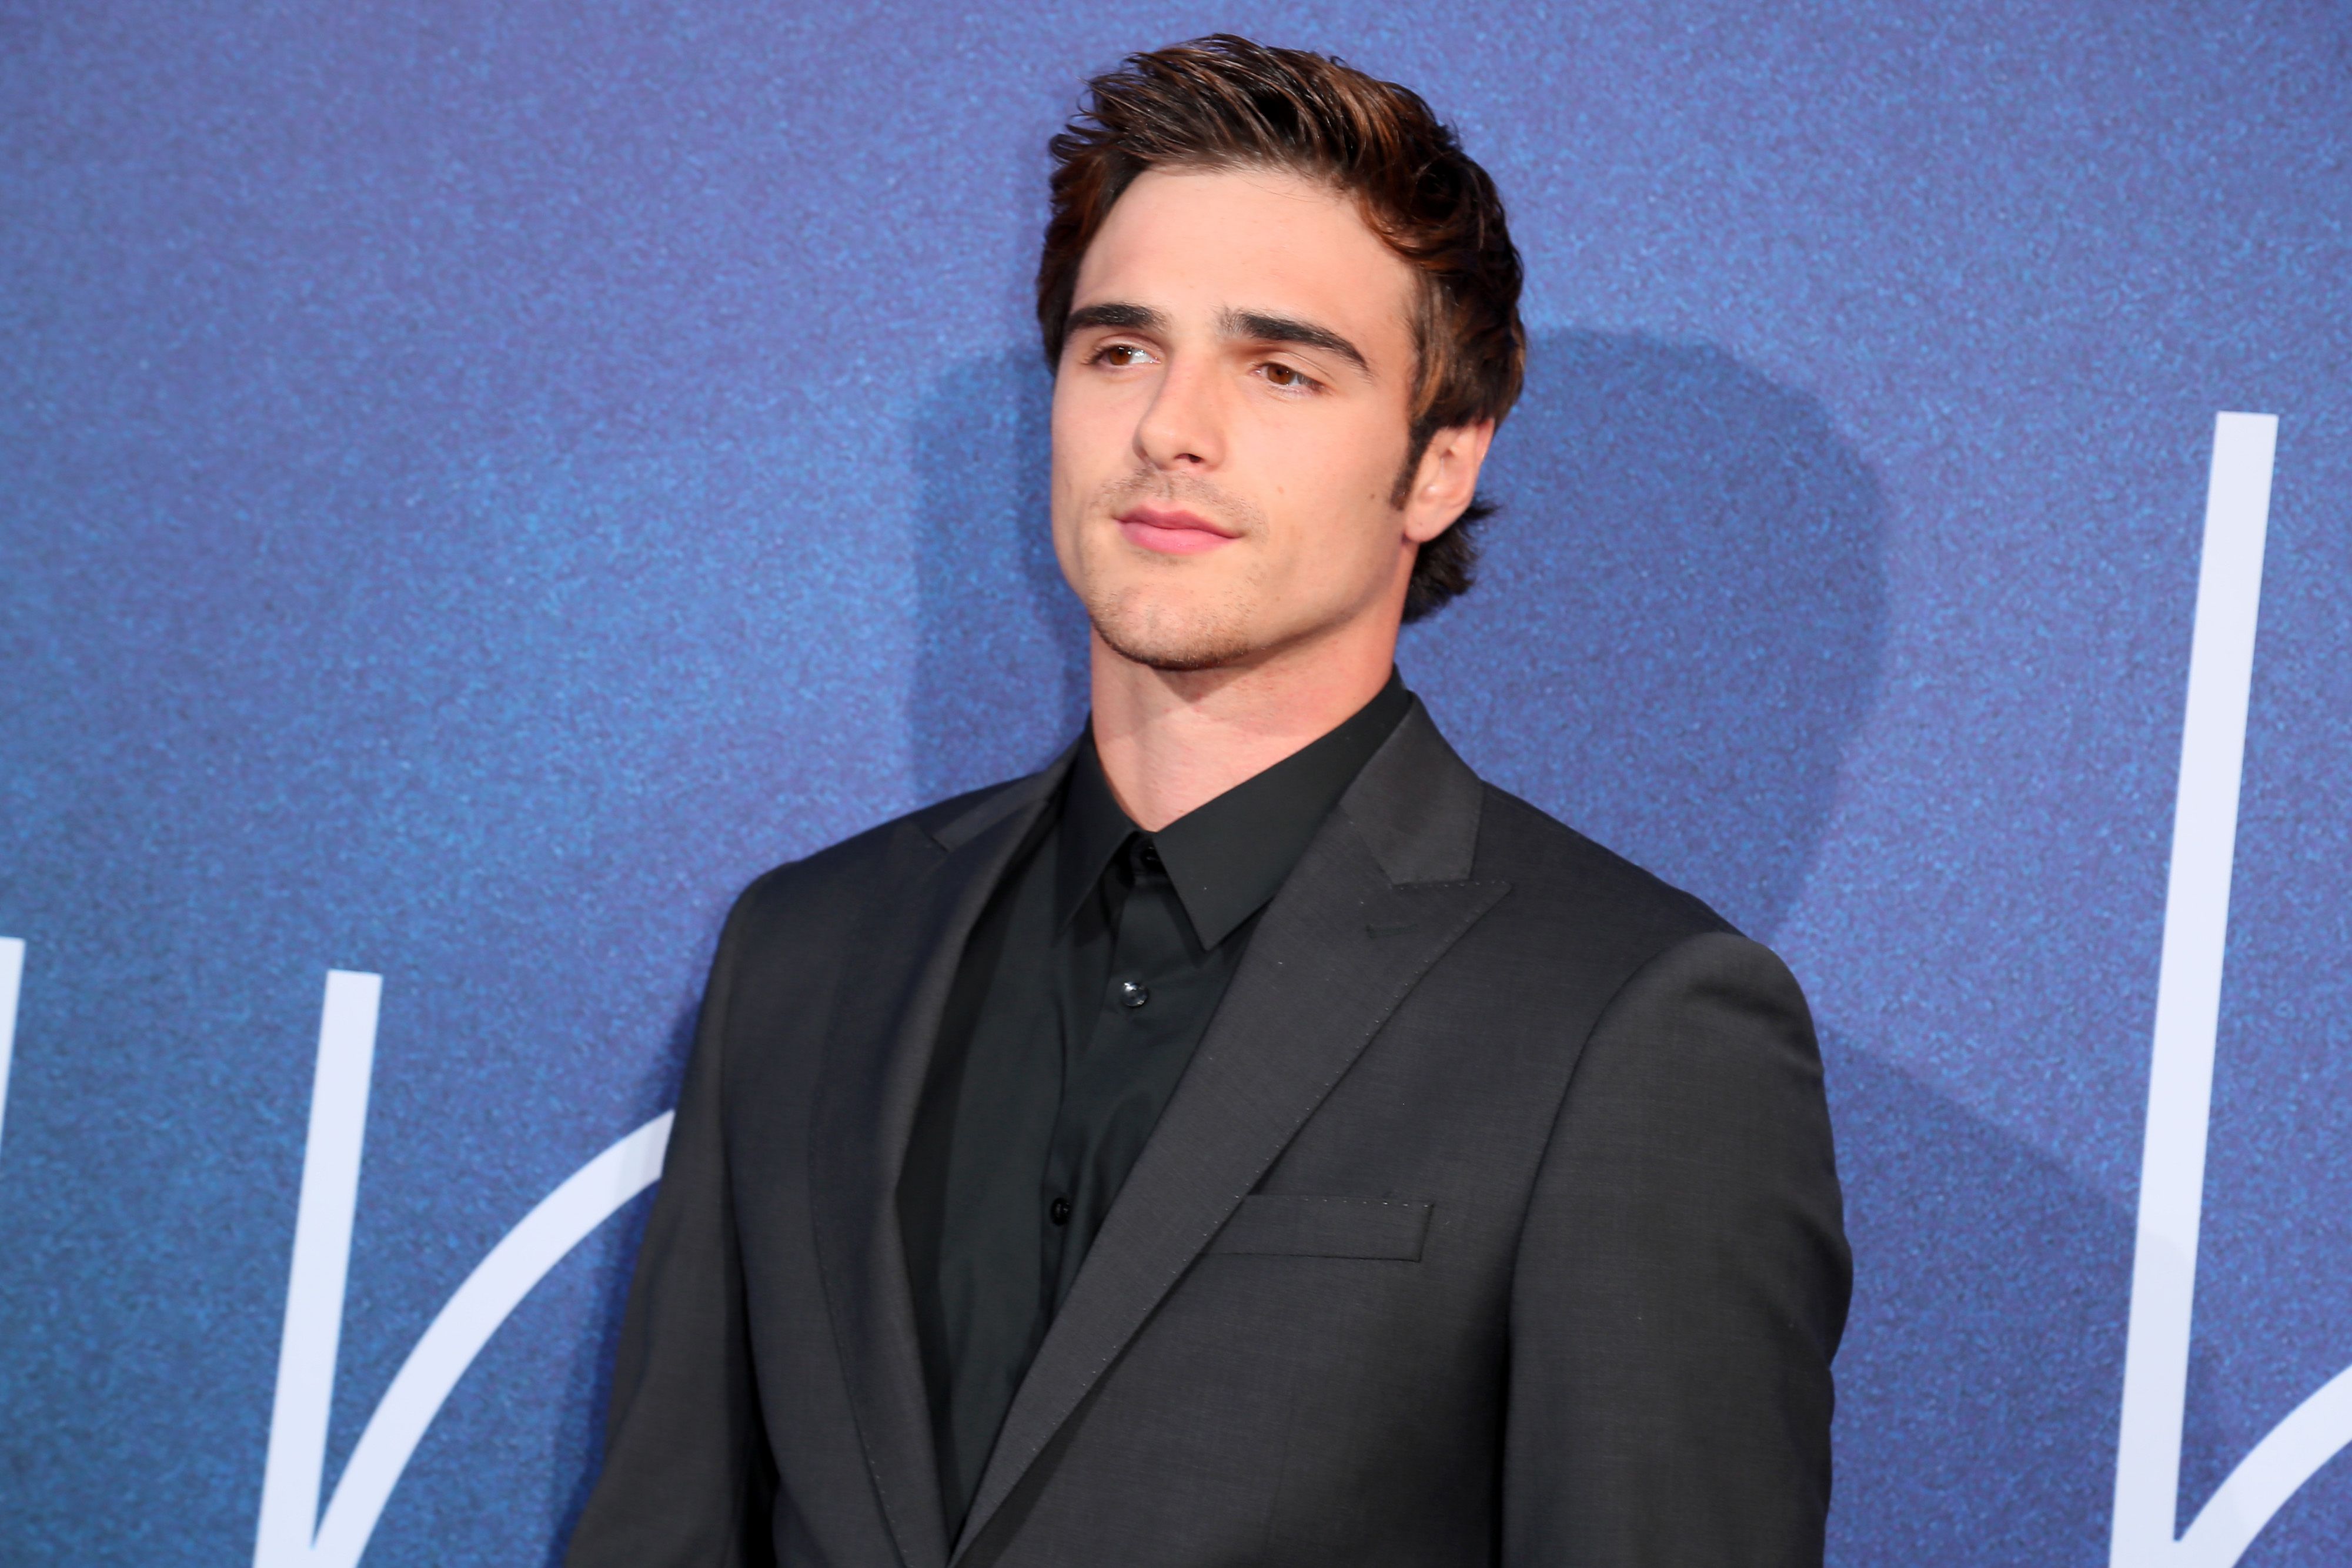 jacob-elordi-attends-the-la-premiere-of-hbos-euphoria-at-news-photo-1153770561-1567612598.jpg